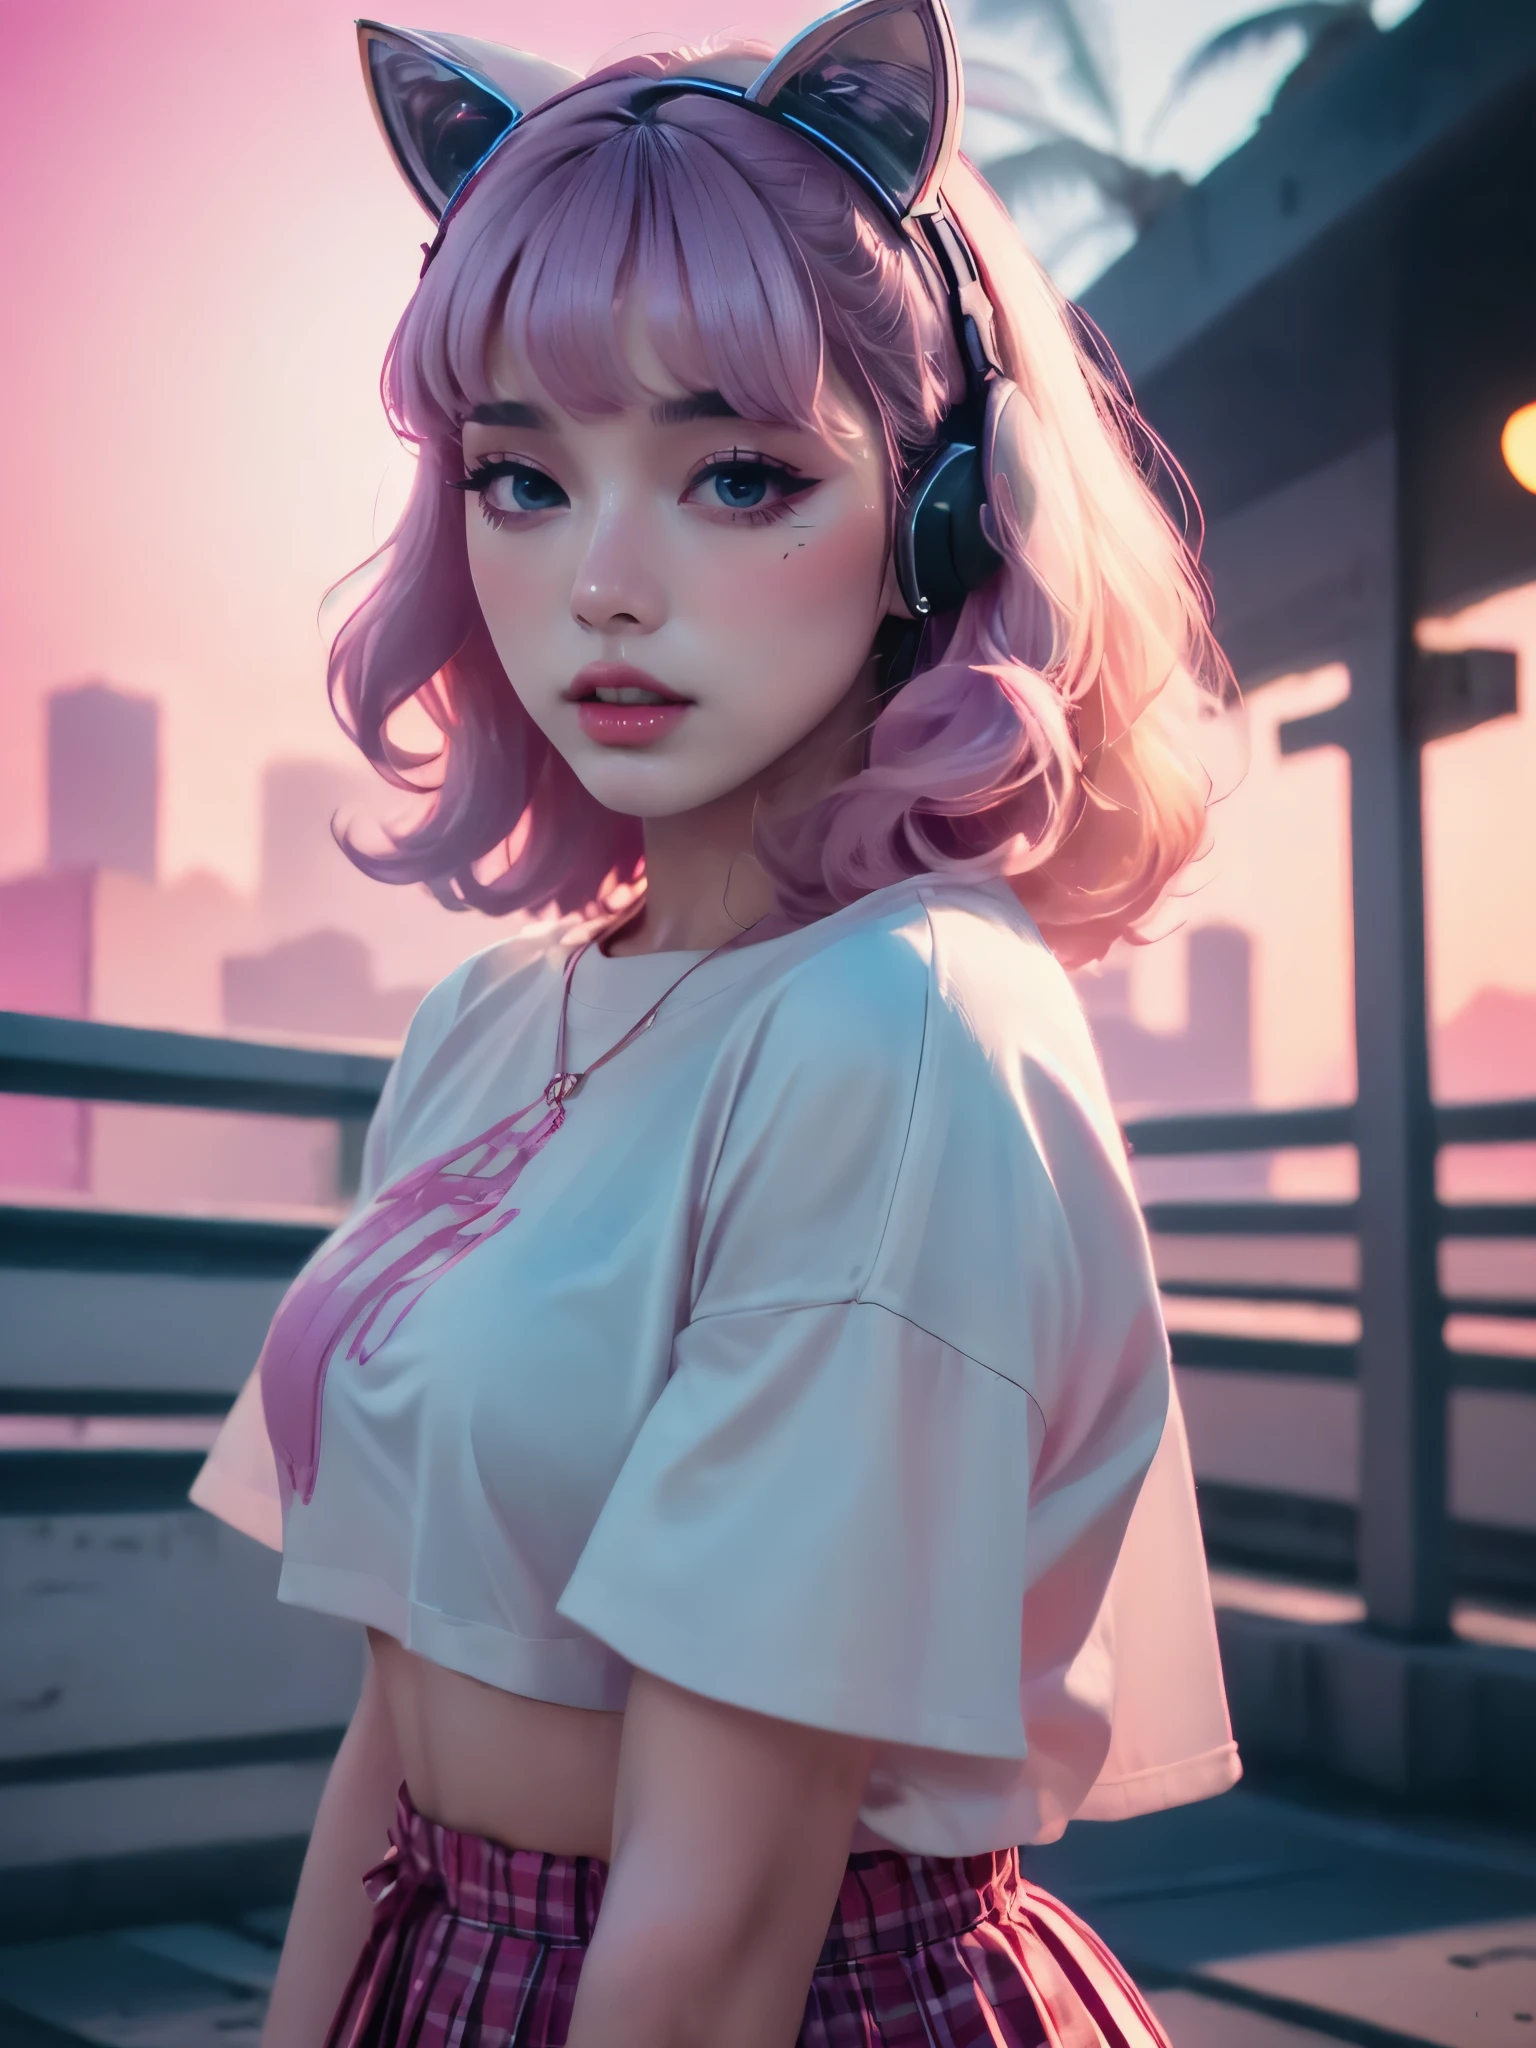 (best quality,4k,8k,highres,masterpiece:1.2),ultra-detailed,(realistic,photorealistic,photo-realistic:1.37),Vaporwave Aesthetic, a school girl, singing,dreamy,neon colors,pastel shades,retro vibes,lo-fi music,sparkling lights,aesthetic background,soft focus,futuristic atmosphere,80s pop music vibes,japanese text,glitch art,vintage computer graphics,flower crown,pleated skirt,detailed facial features,beautiful detailed eyes,beautiful detailed lips,long eyelashes,holographic microphone,pink hair,playful expression,confident pose,vibrant colors,animated background,digital art,ethereal scenery,wavy hair,peaceful serenity,magical aura,gradient sunset,loose curls,groovy beats